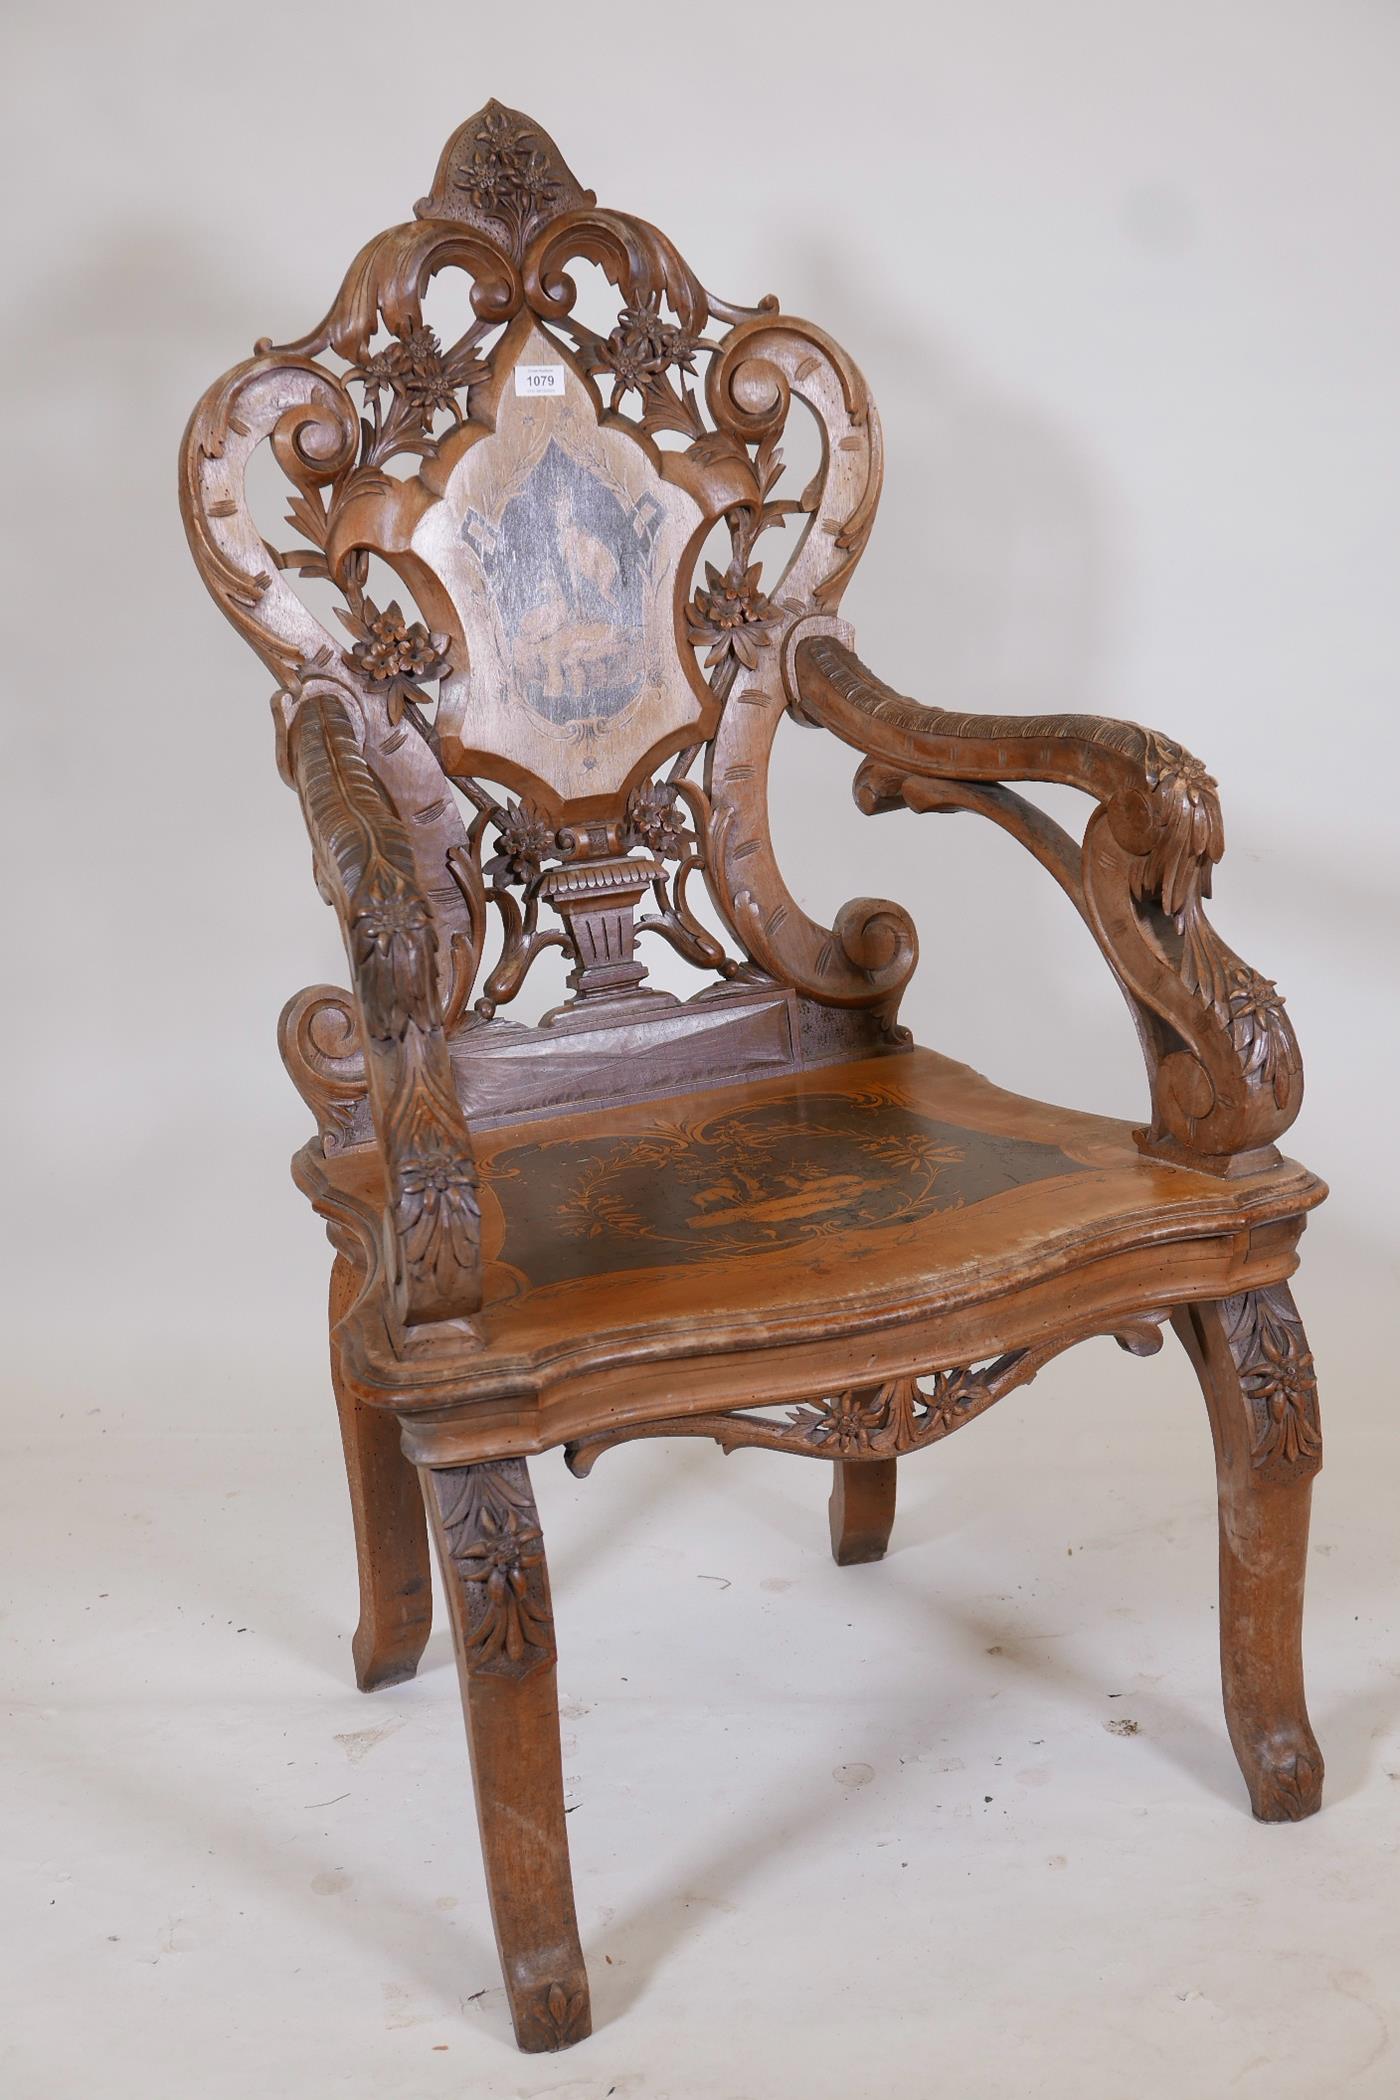 A C19th Swiss inlaid walnut musical open armchair with carved and pierced back and arms, 47½" high - Image 2 of 10